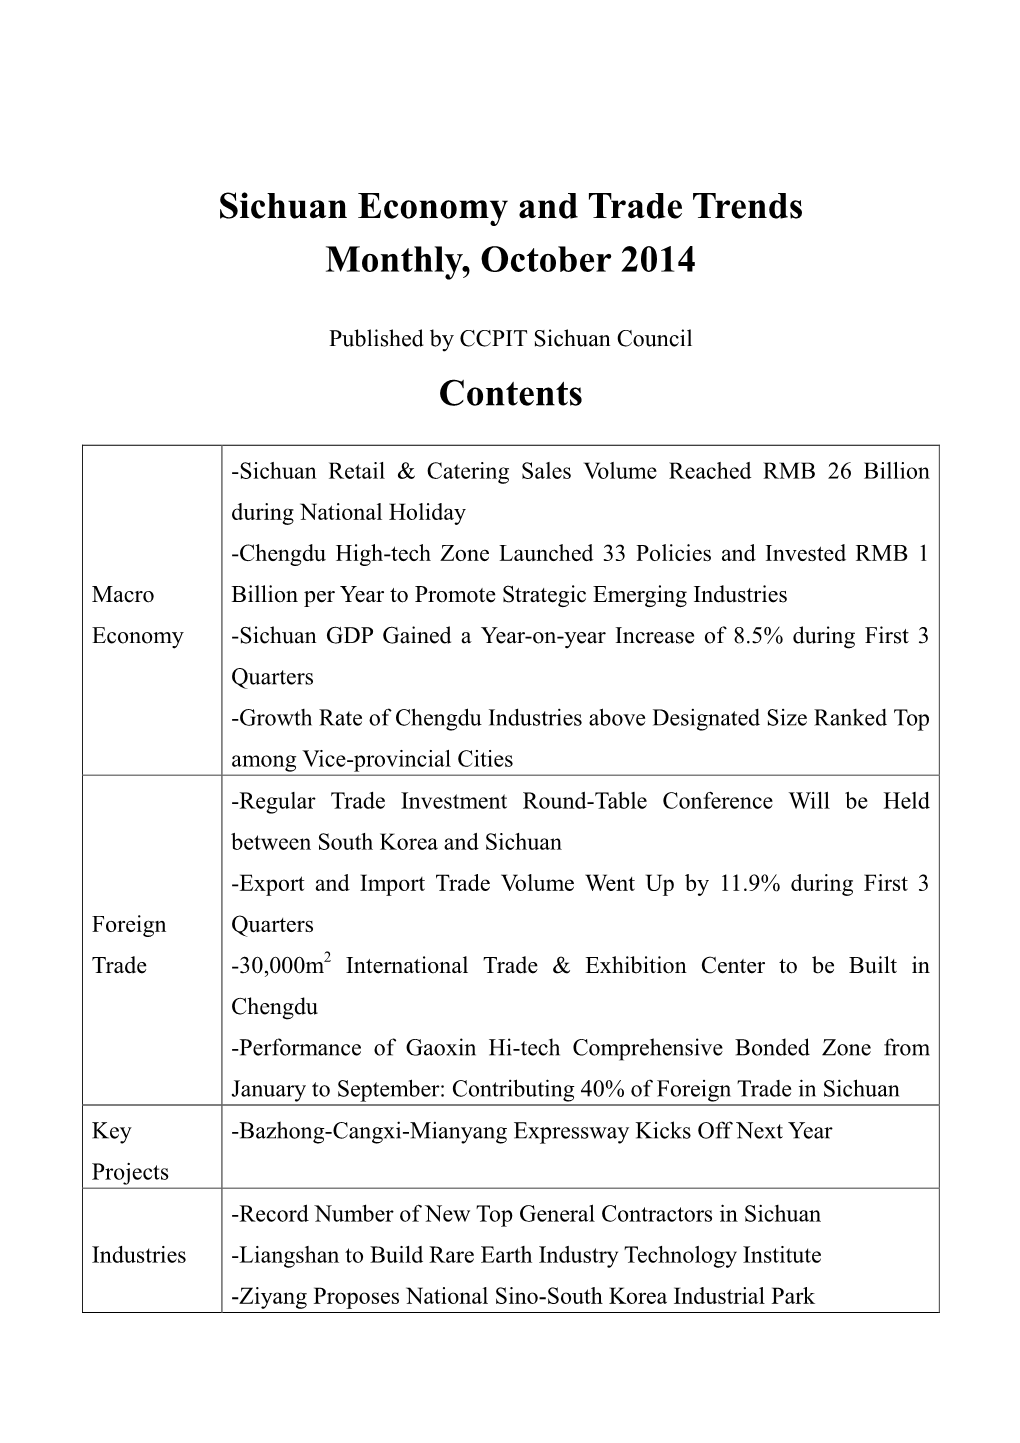 Sichuan Economy and Trade Trends Monthly, October 2014 Contents